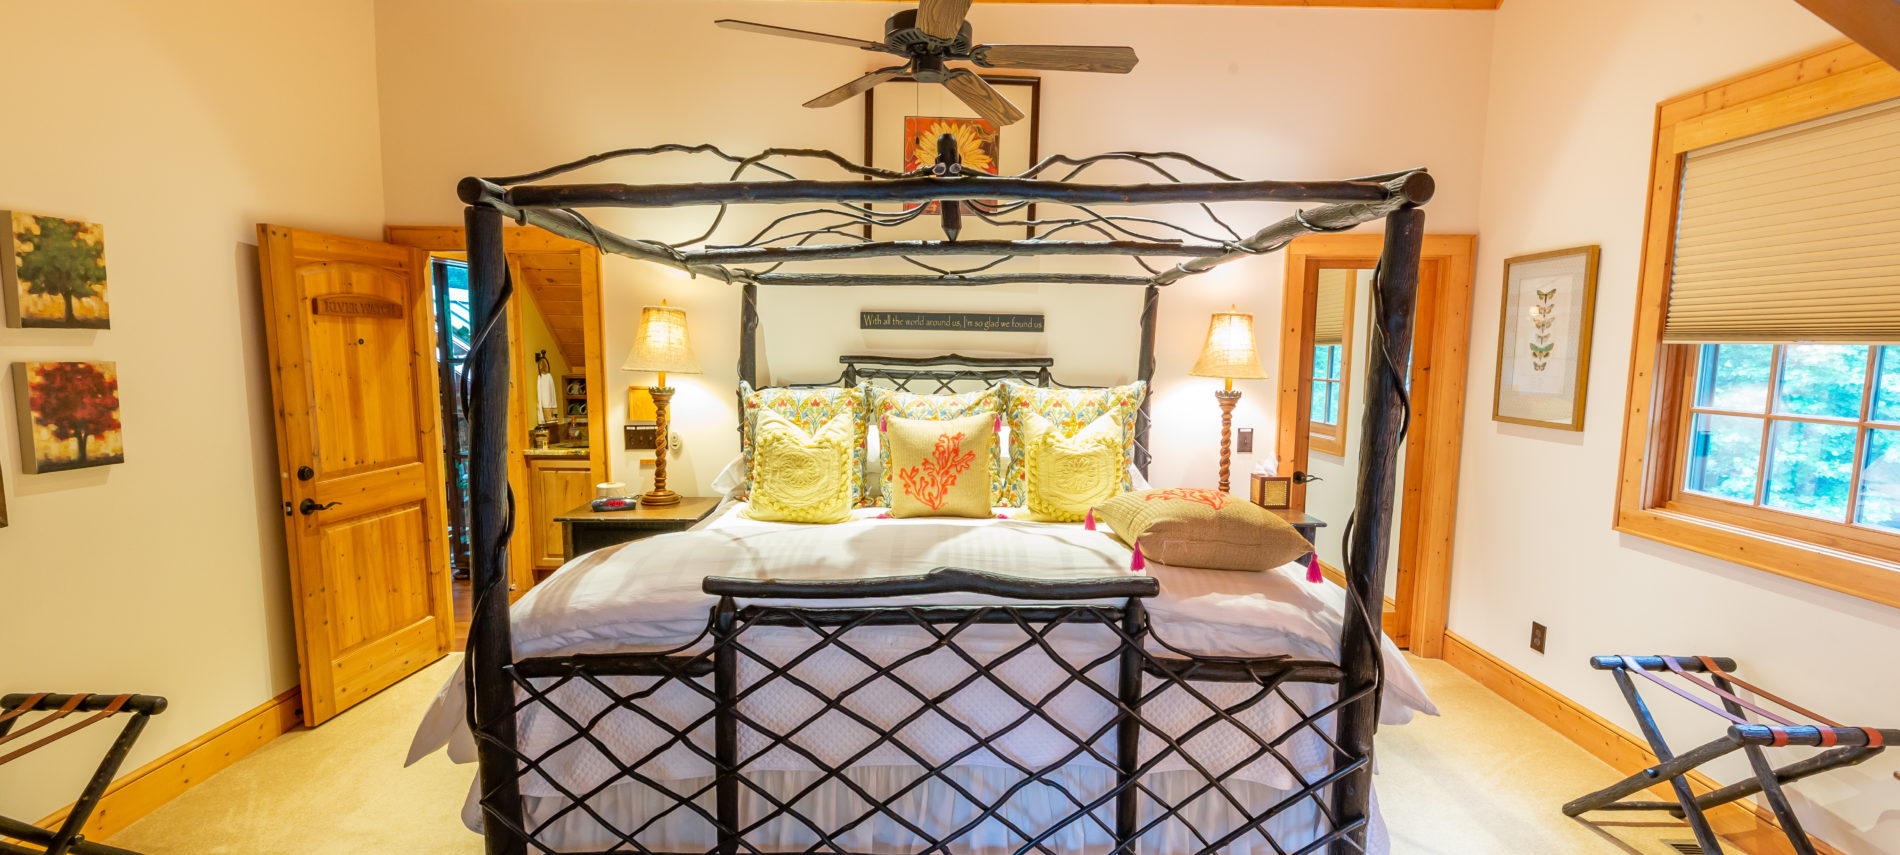 View of River Watch Bedroom... Twig Headboard and Footboard With canopy made of twigs. Pillows on bed... Luggage racks on each side wall. Fan over bed and pictures on walls